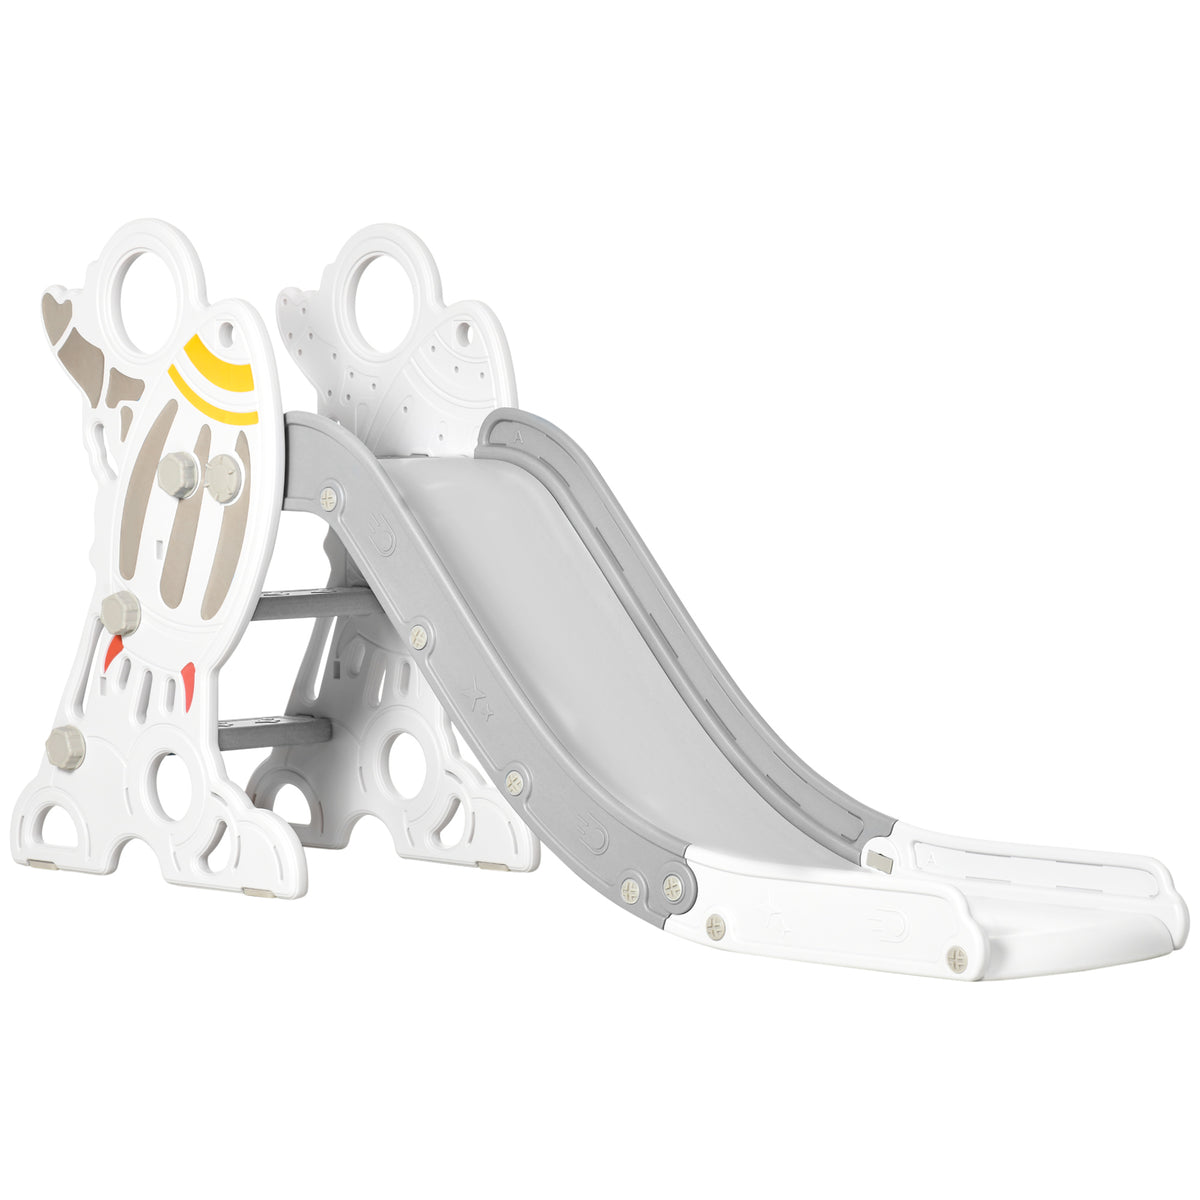 AIYAPLAY Space Theme Kids Slide, Indoor Freestanding Slide for Toddlers Ages 1.5-3 Years, Grey